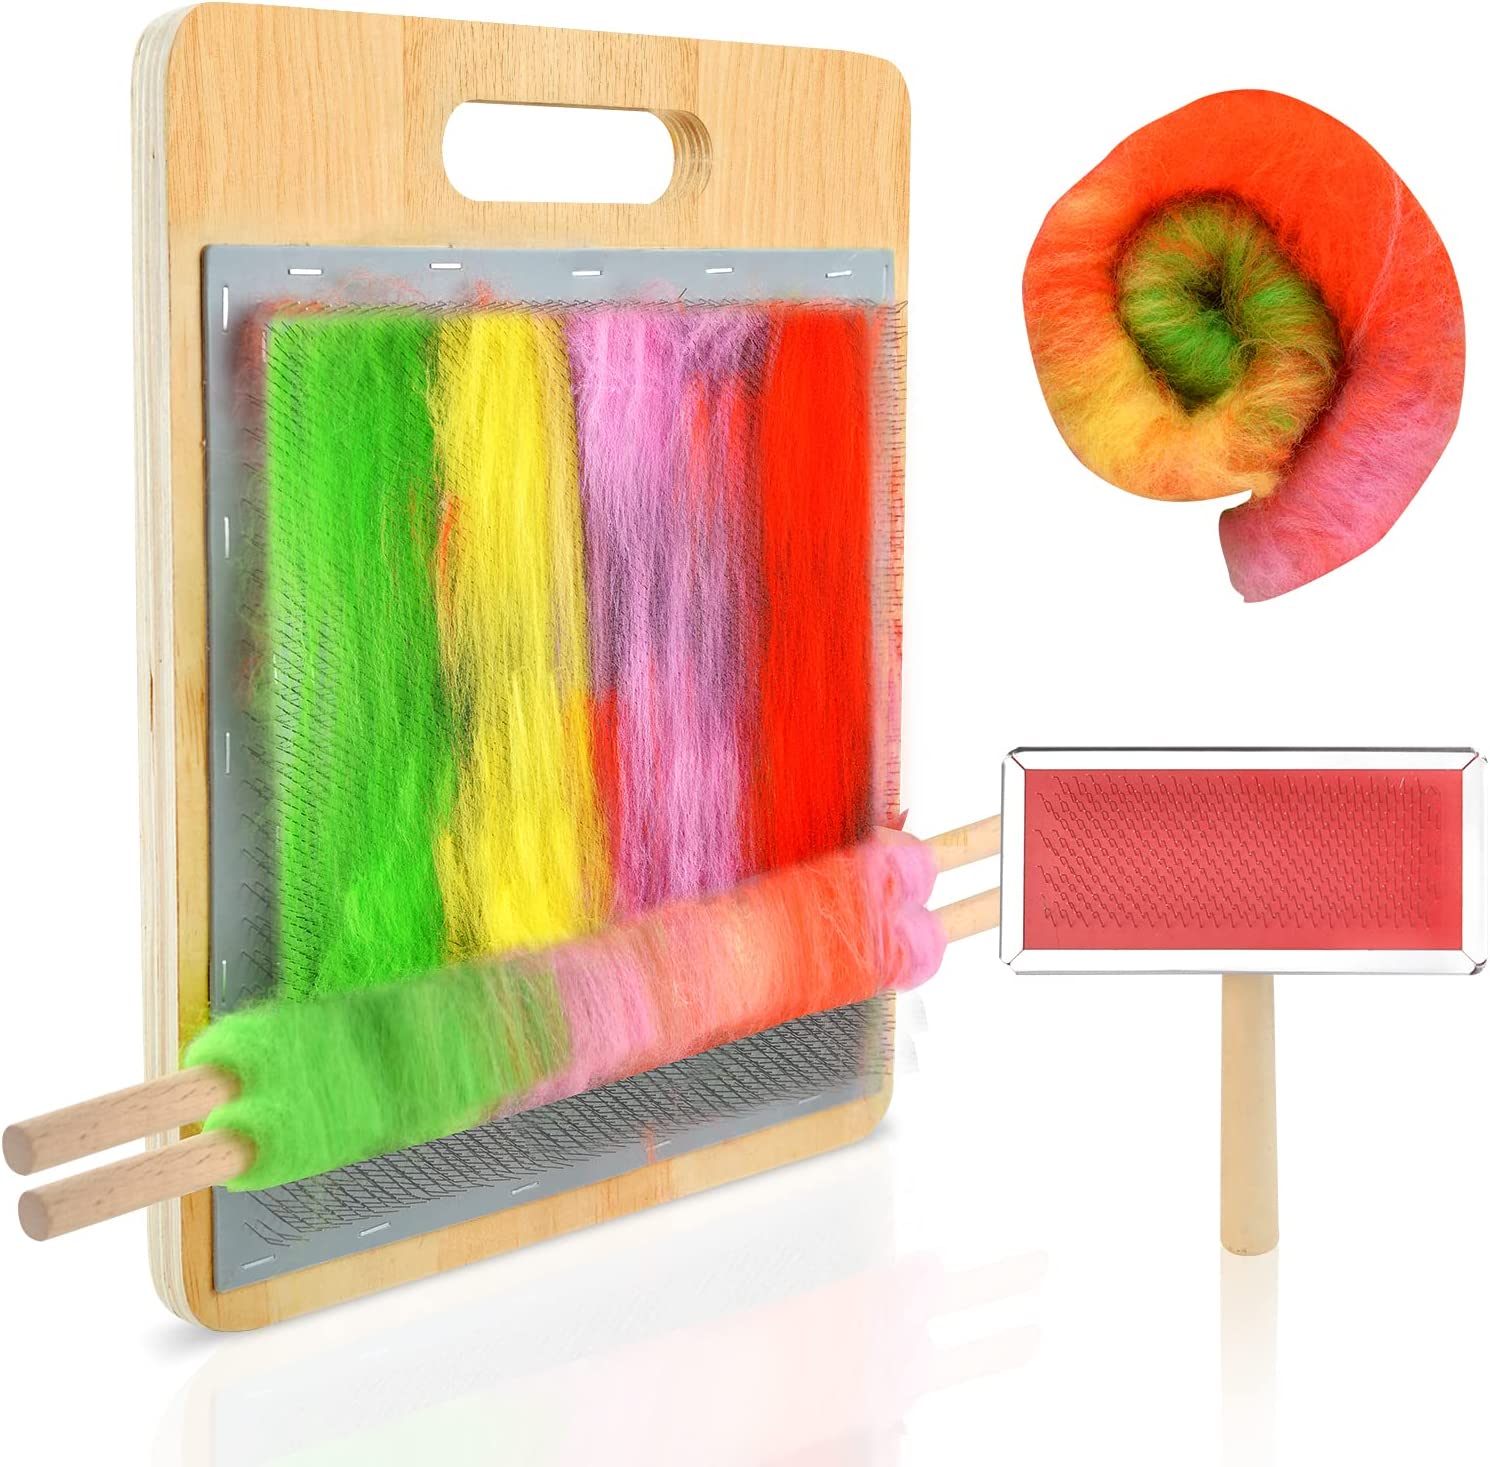 Gosemai Carding Brush Set 1 Pieces Blending Board with 1 Pieces Wool Brush  2 Pieces Dowels Hand Carders for Rolags Wool - Walmart.com